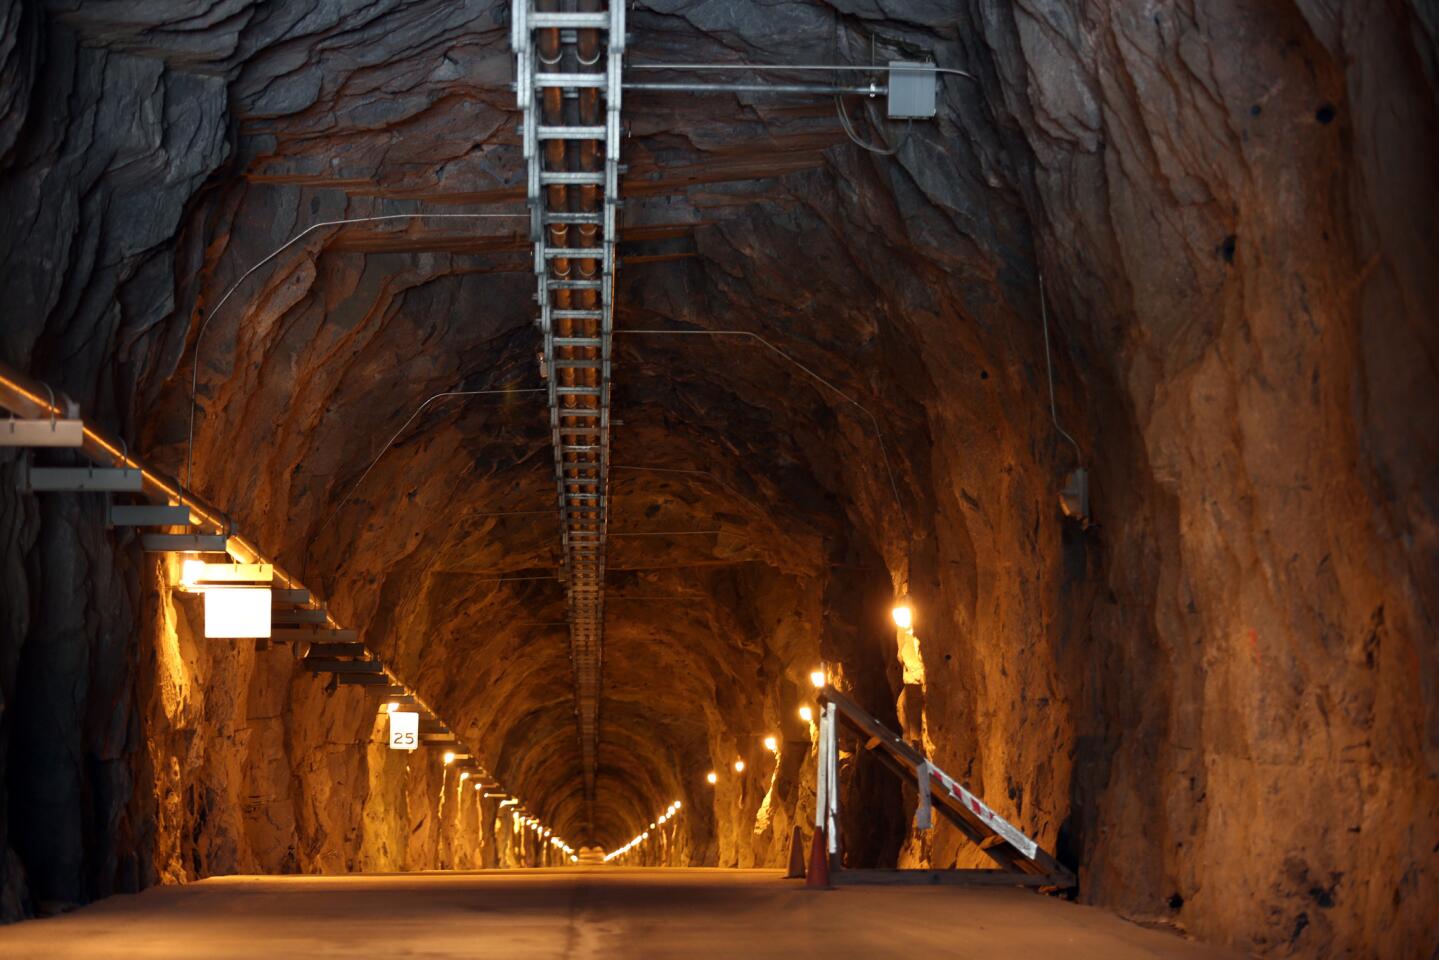 BIG CREEK, CA - JULY 28, 2015: The long cave tunnel that leads to a generator turbine that spins 200 feet beneath Shaver Lake at Southern California Edison's Big Creek John S. Eastwood Power Station which has produced cheap and reliable electricity for decades but now the drought may sideline the station on JULY 28, 2015.